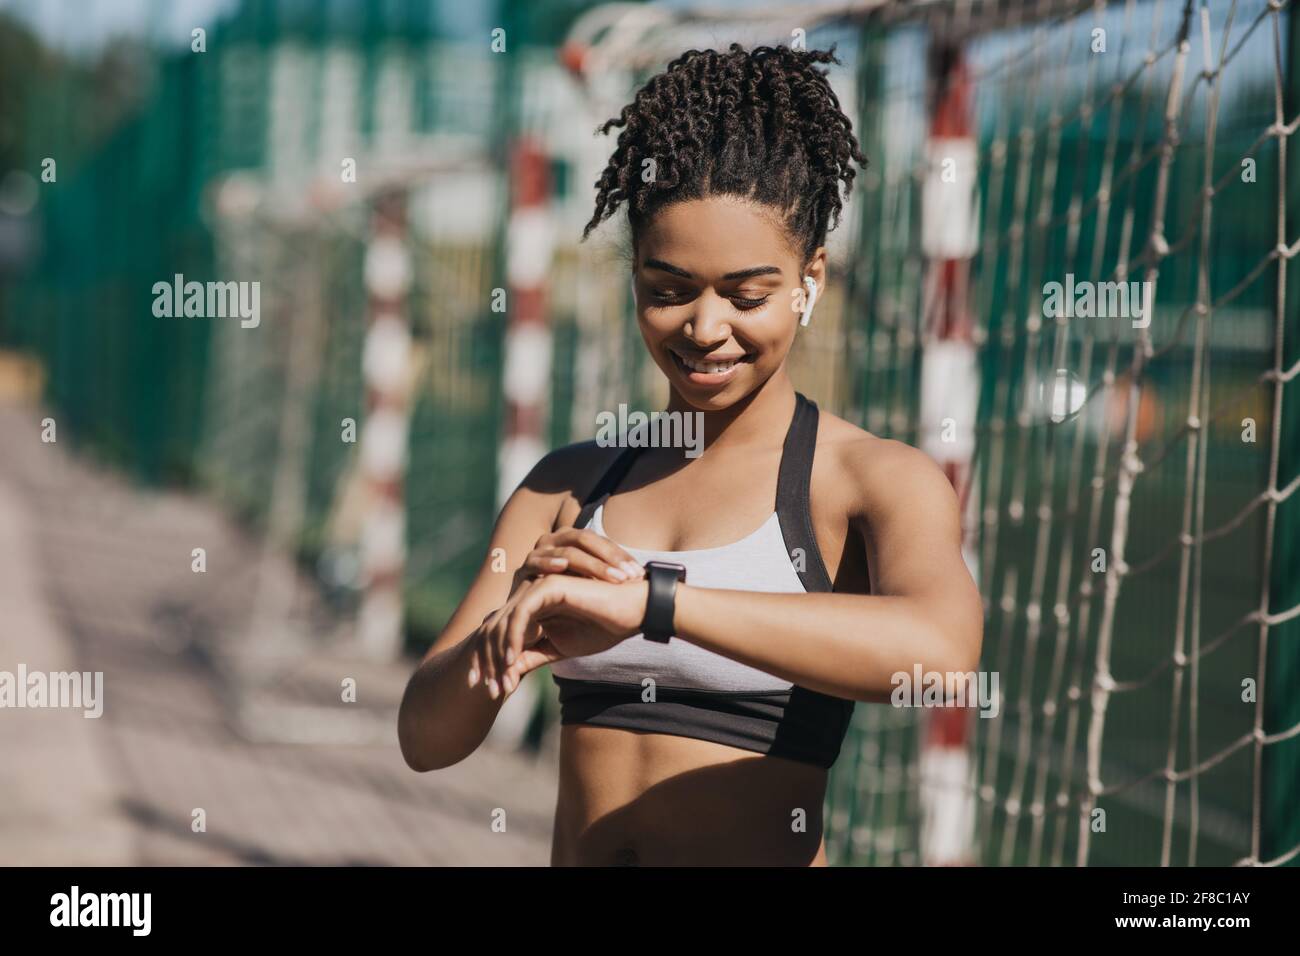 Beauty blogger and fitness trainer, working out outdoors Stock Photo